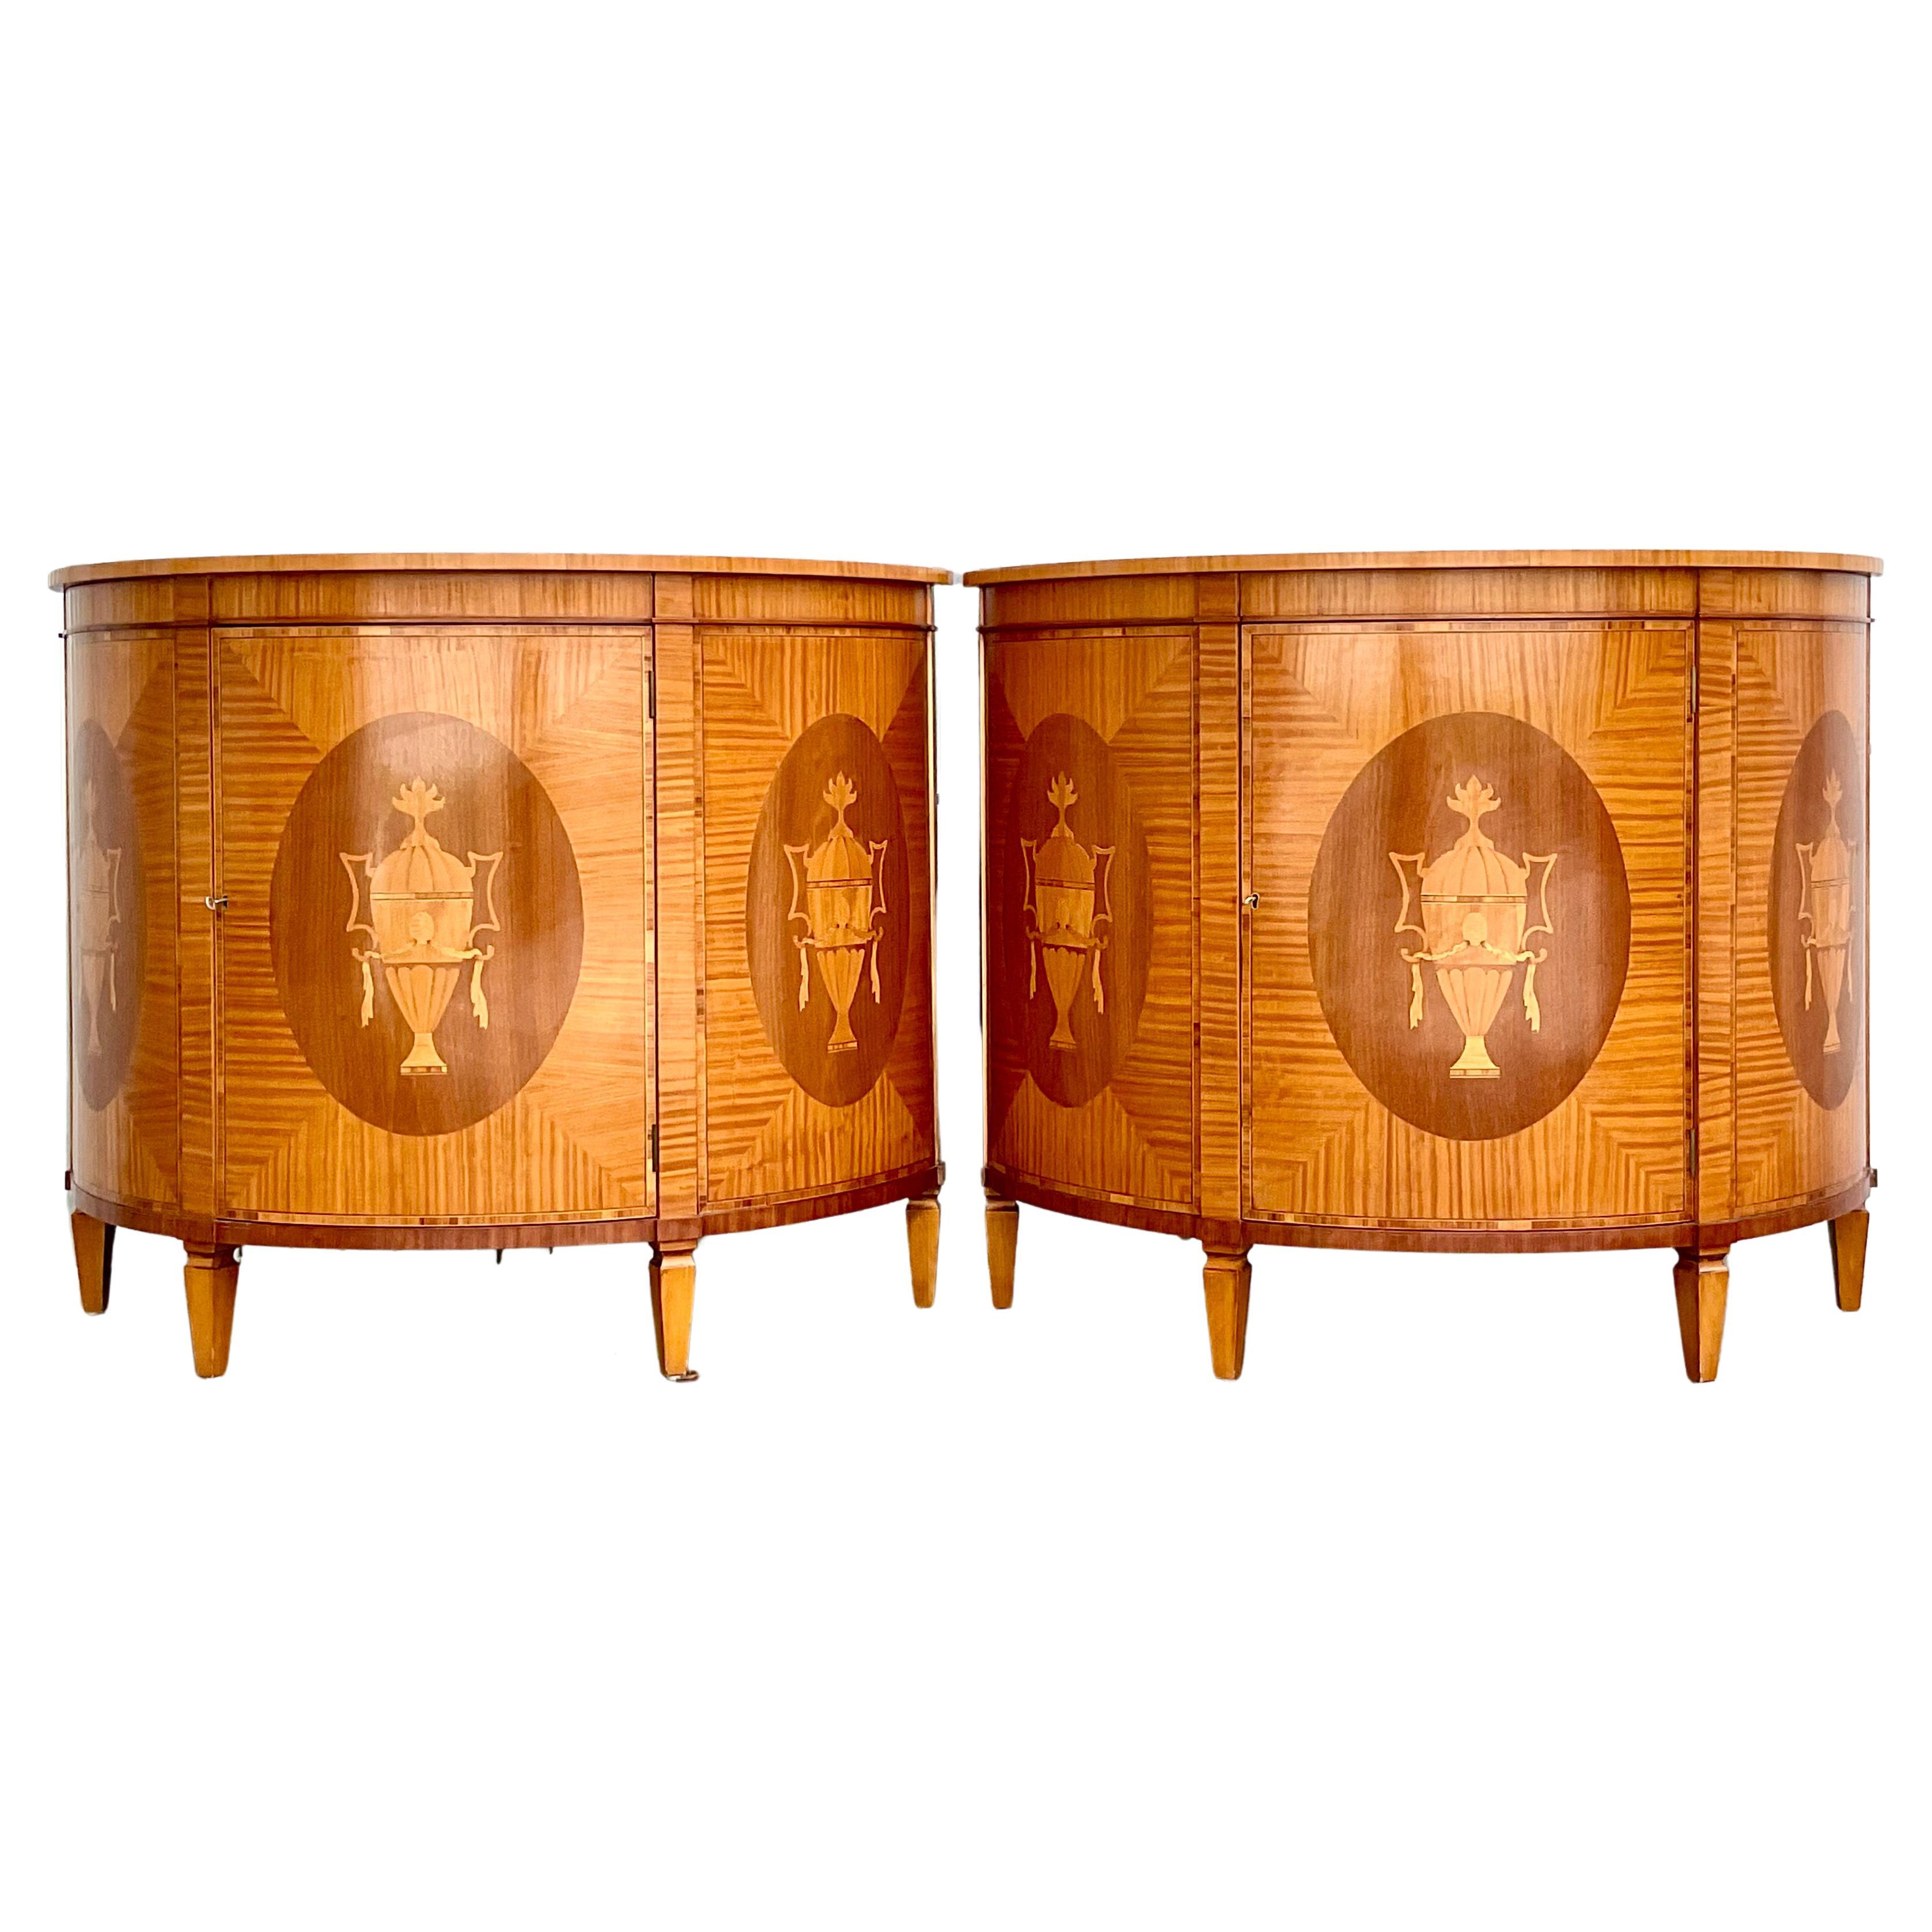 Vintage Regency Marquetry Demilune Cabinets, a Pair